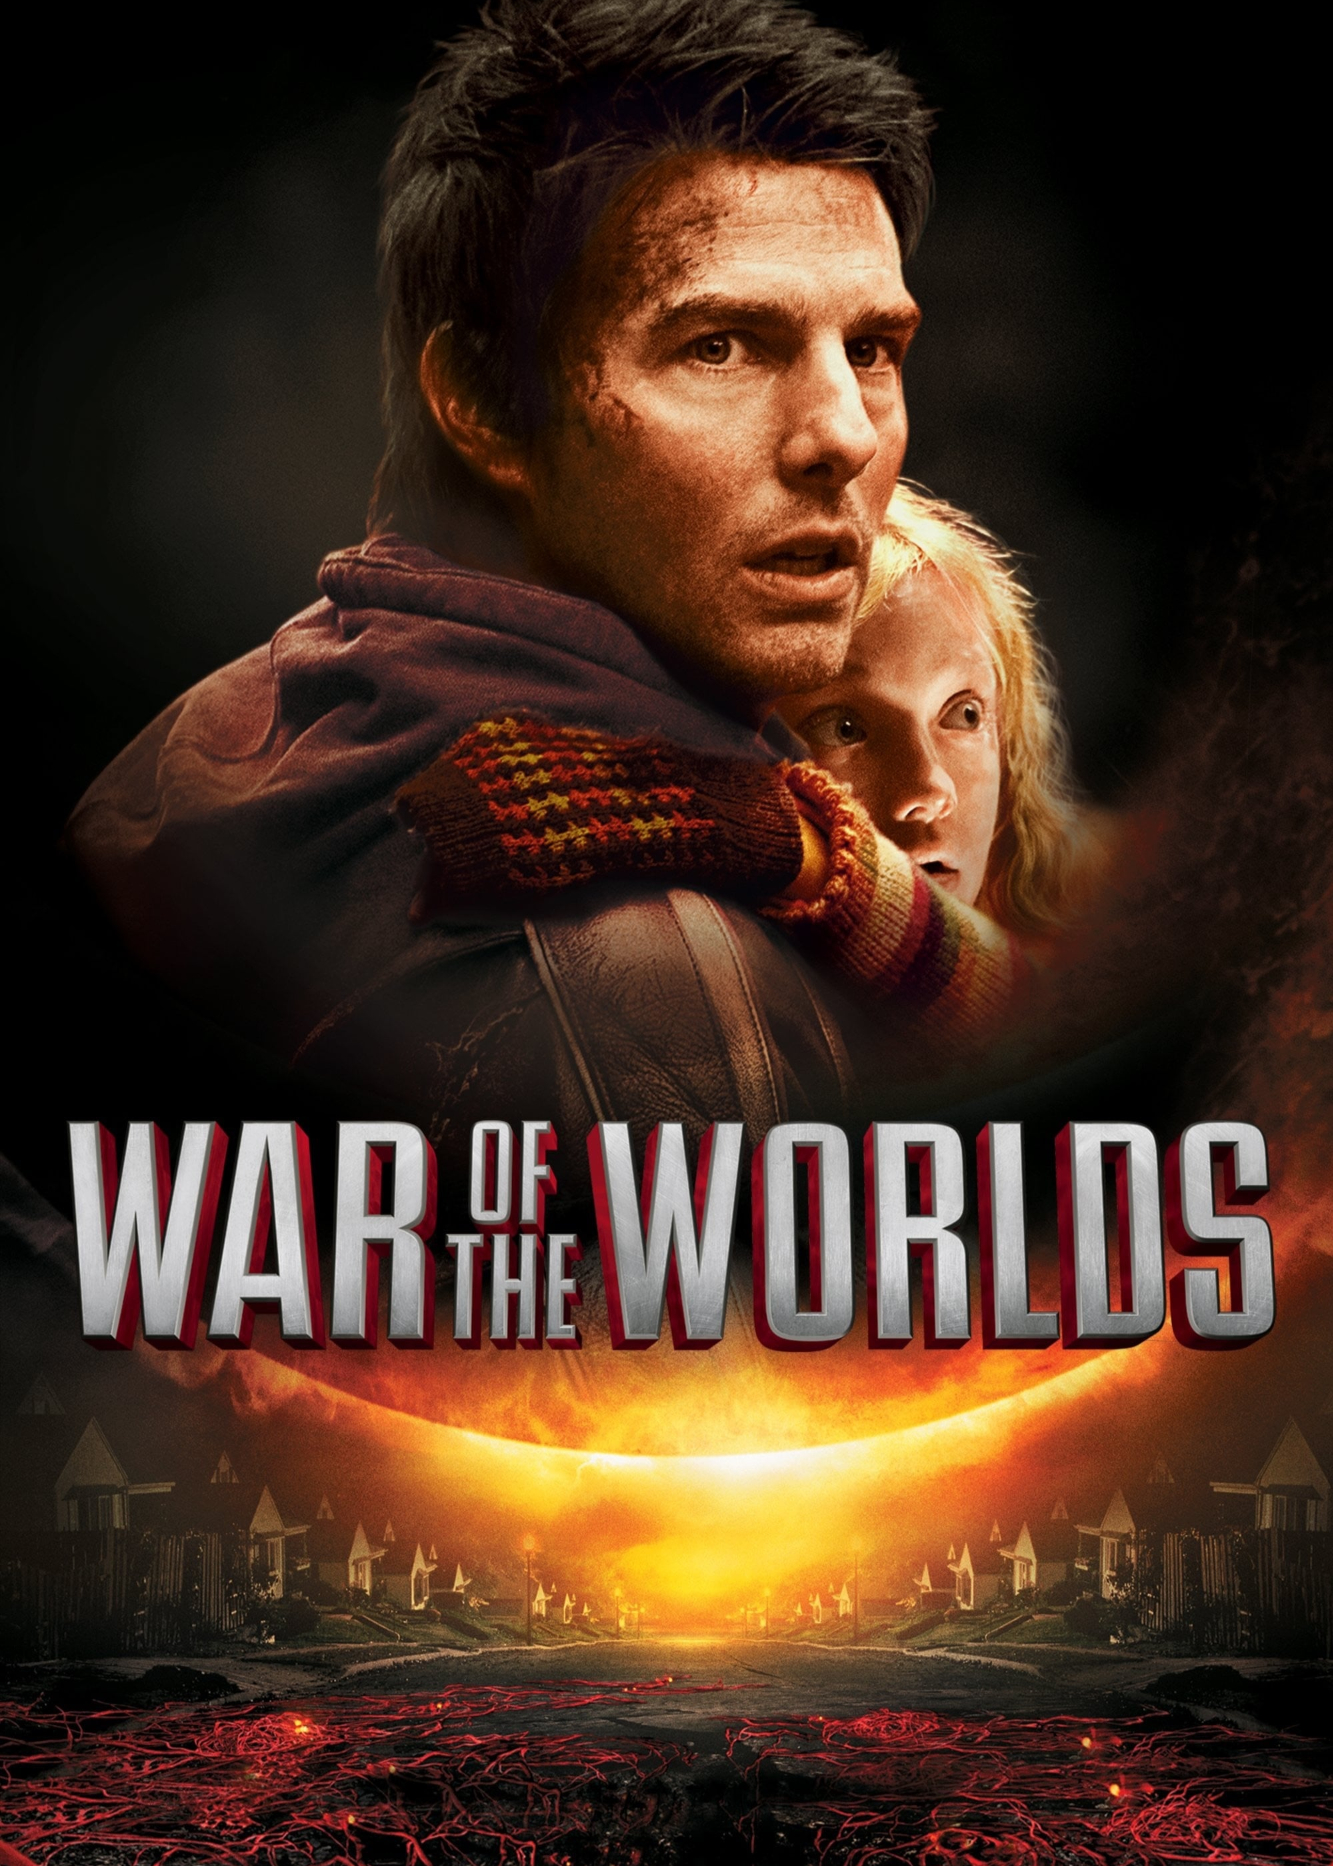 Poster Phim War of the Worlds (War of the Worlds)